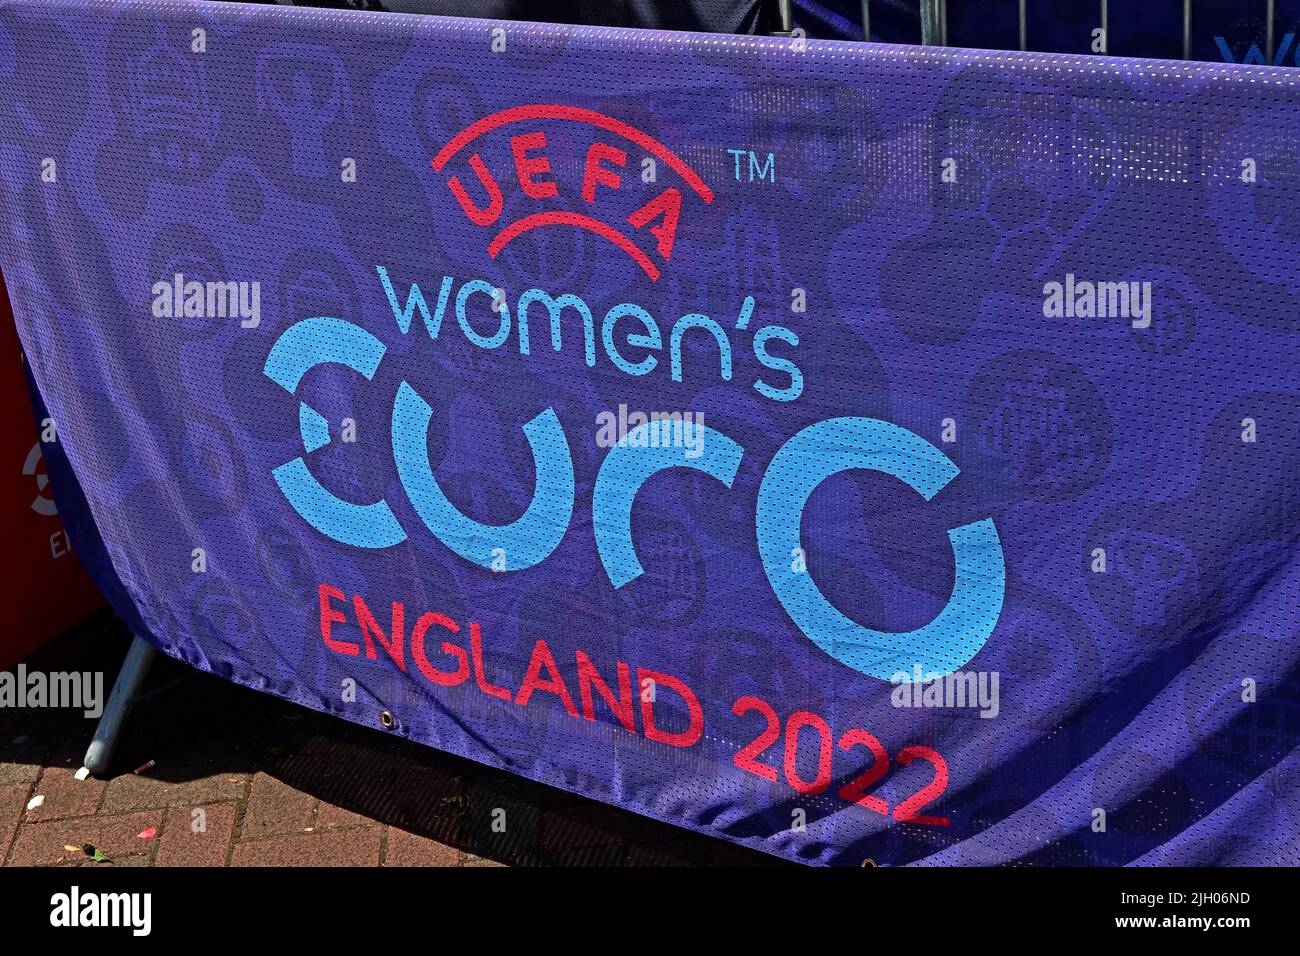 Banners for UEFA Womans Euro championship England 2022,in Leigh town centre, ready for Portugal vs Netherlands (Holland) after match party, NW England Stock Photo